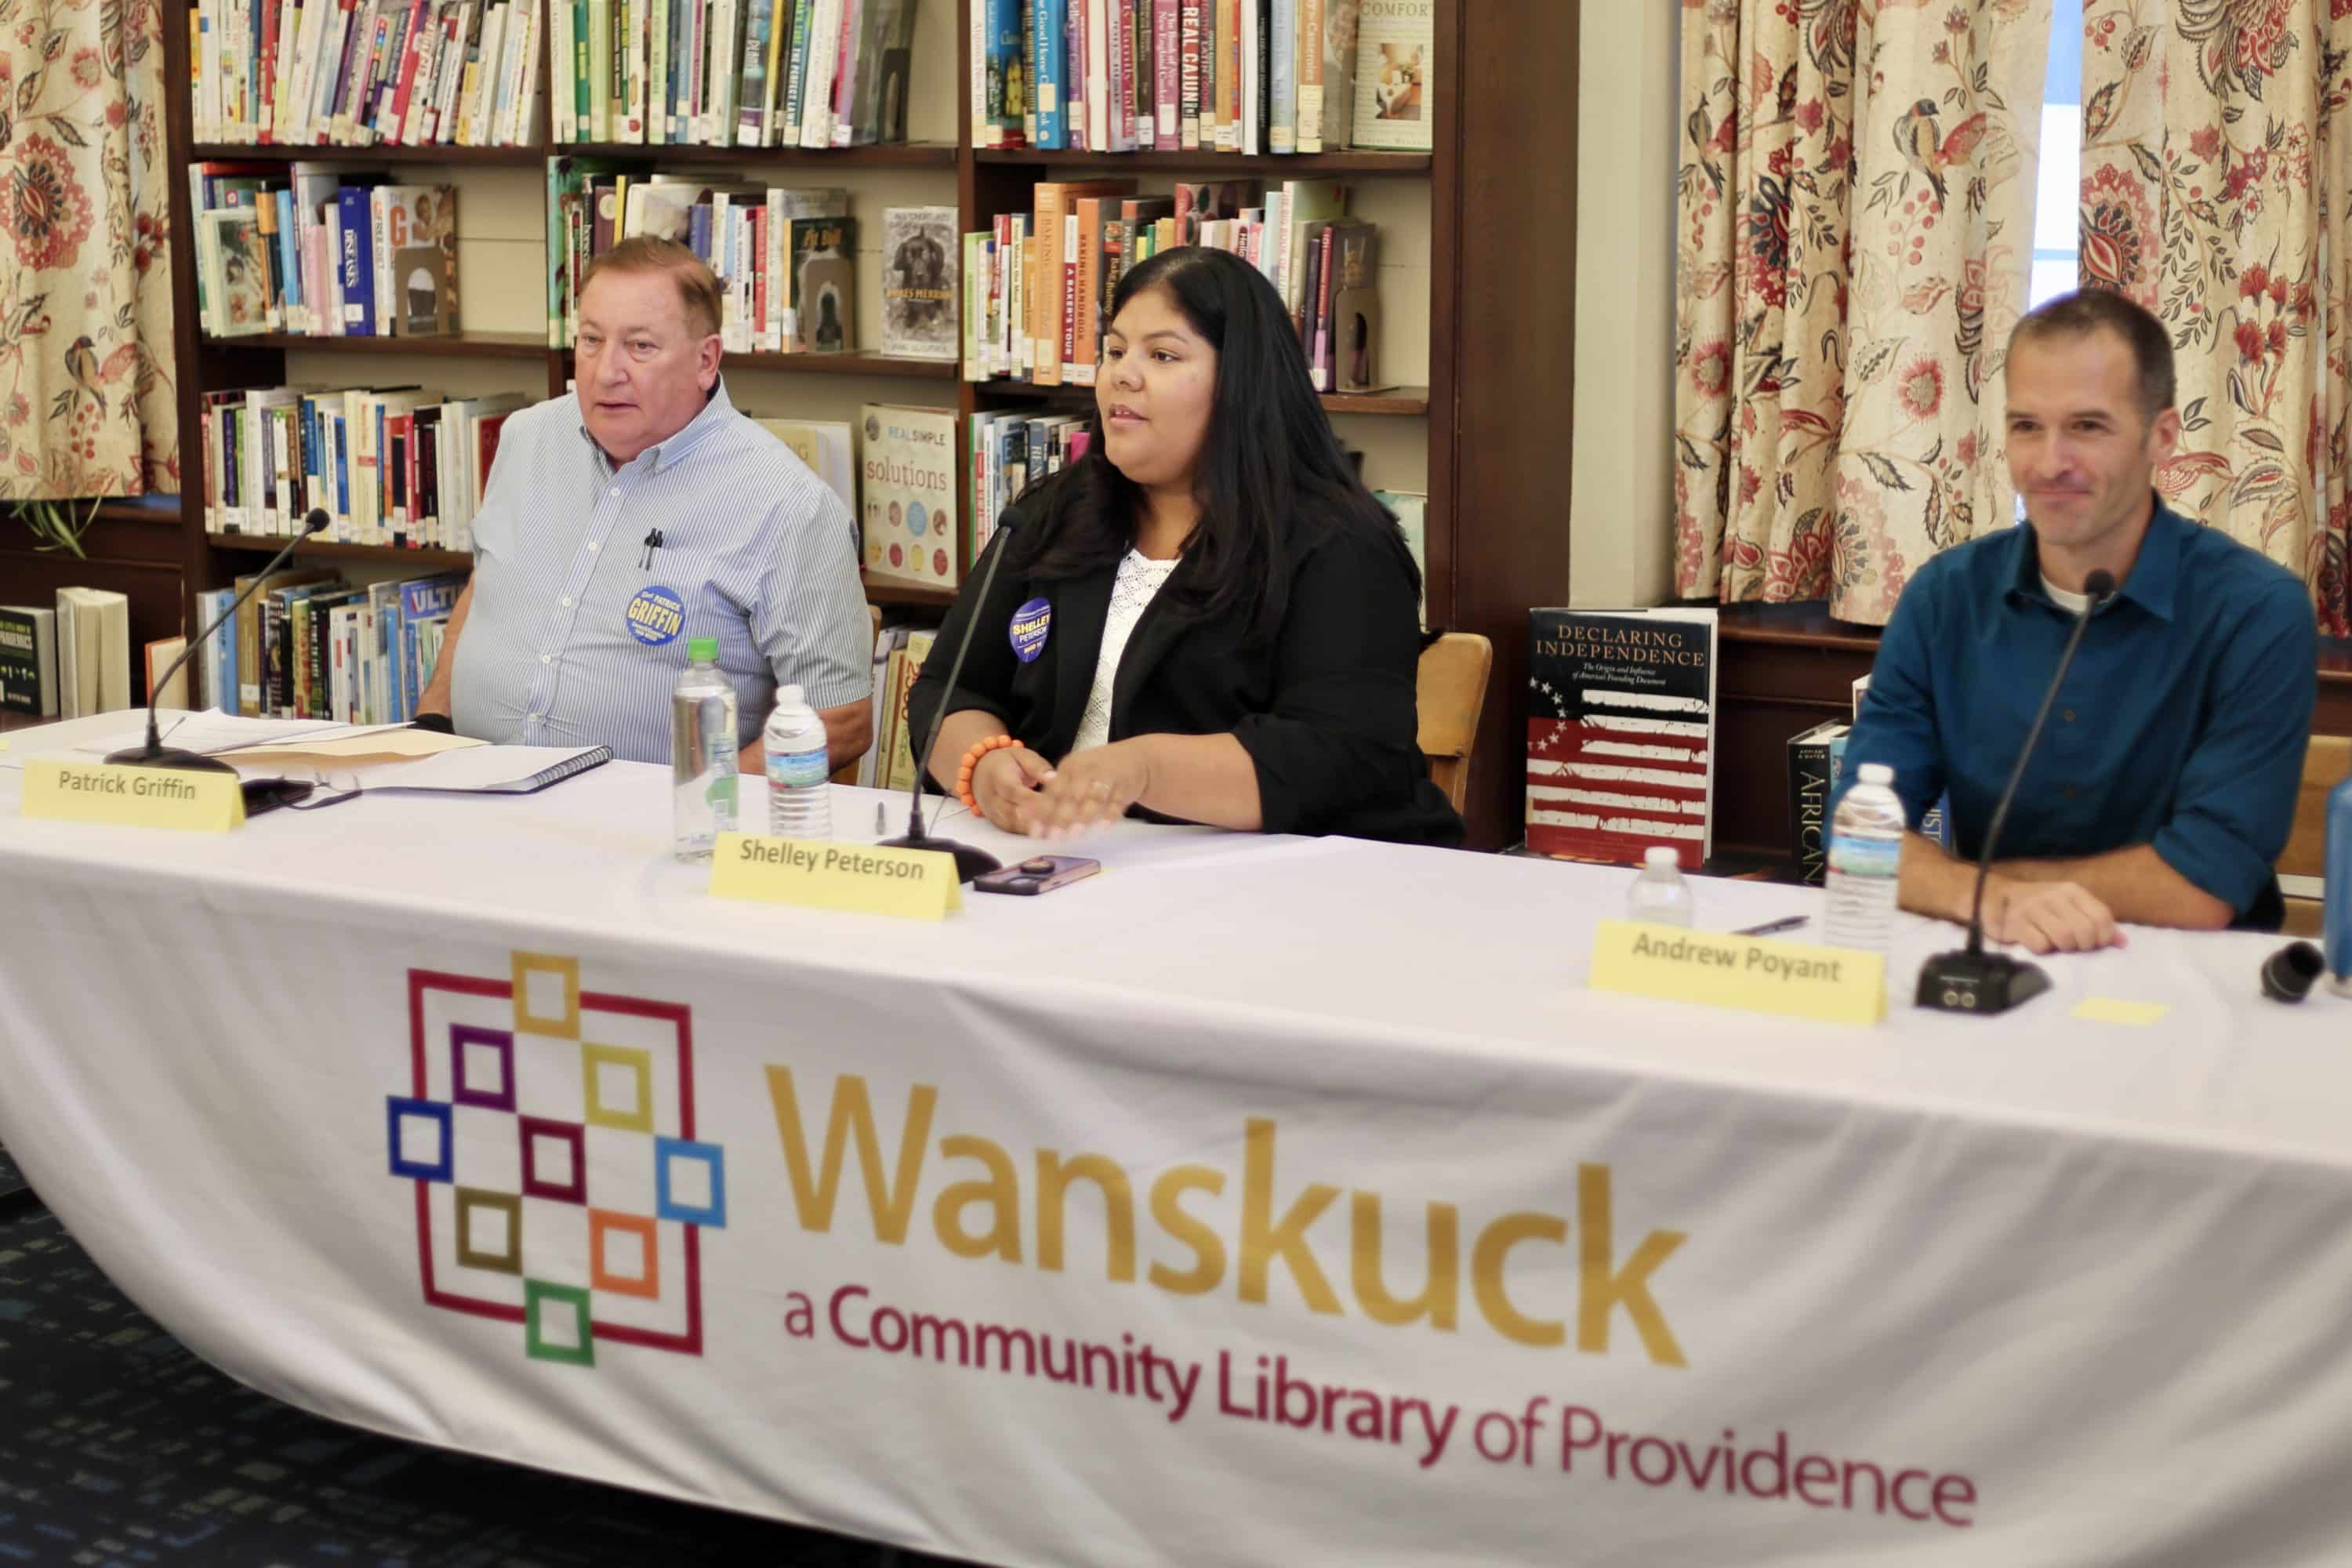 The Ward 14 City Council debate shows clear differences between the candidates